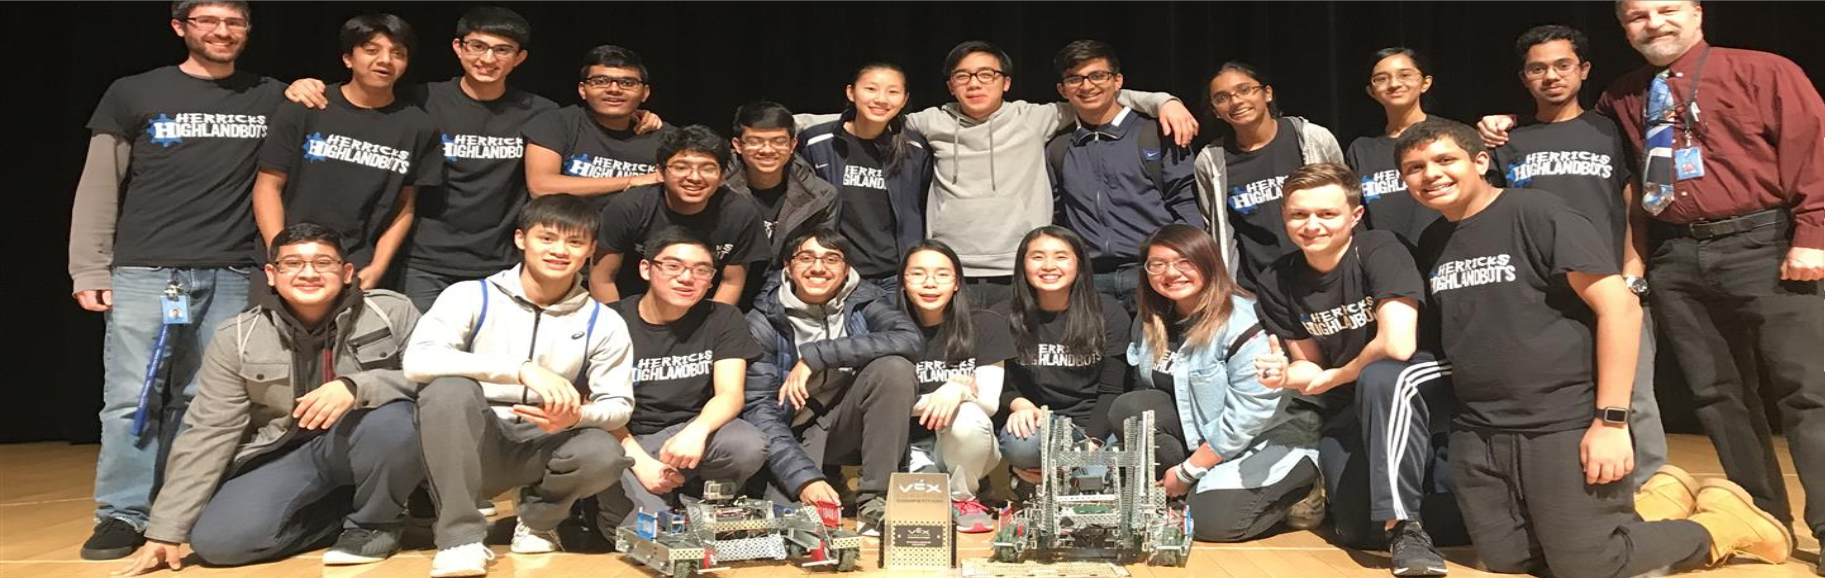 February 2018: Team 11040B receives the Excellence award, qualifying for states and nationals